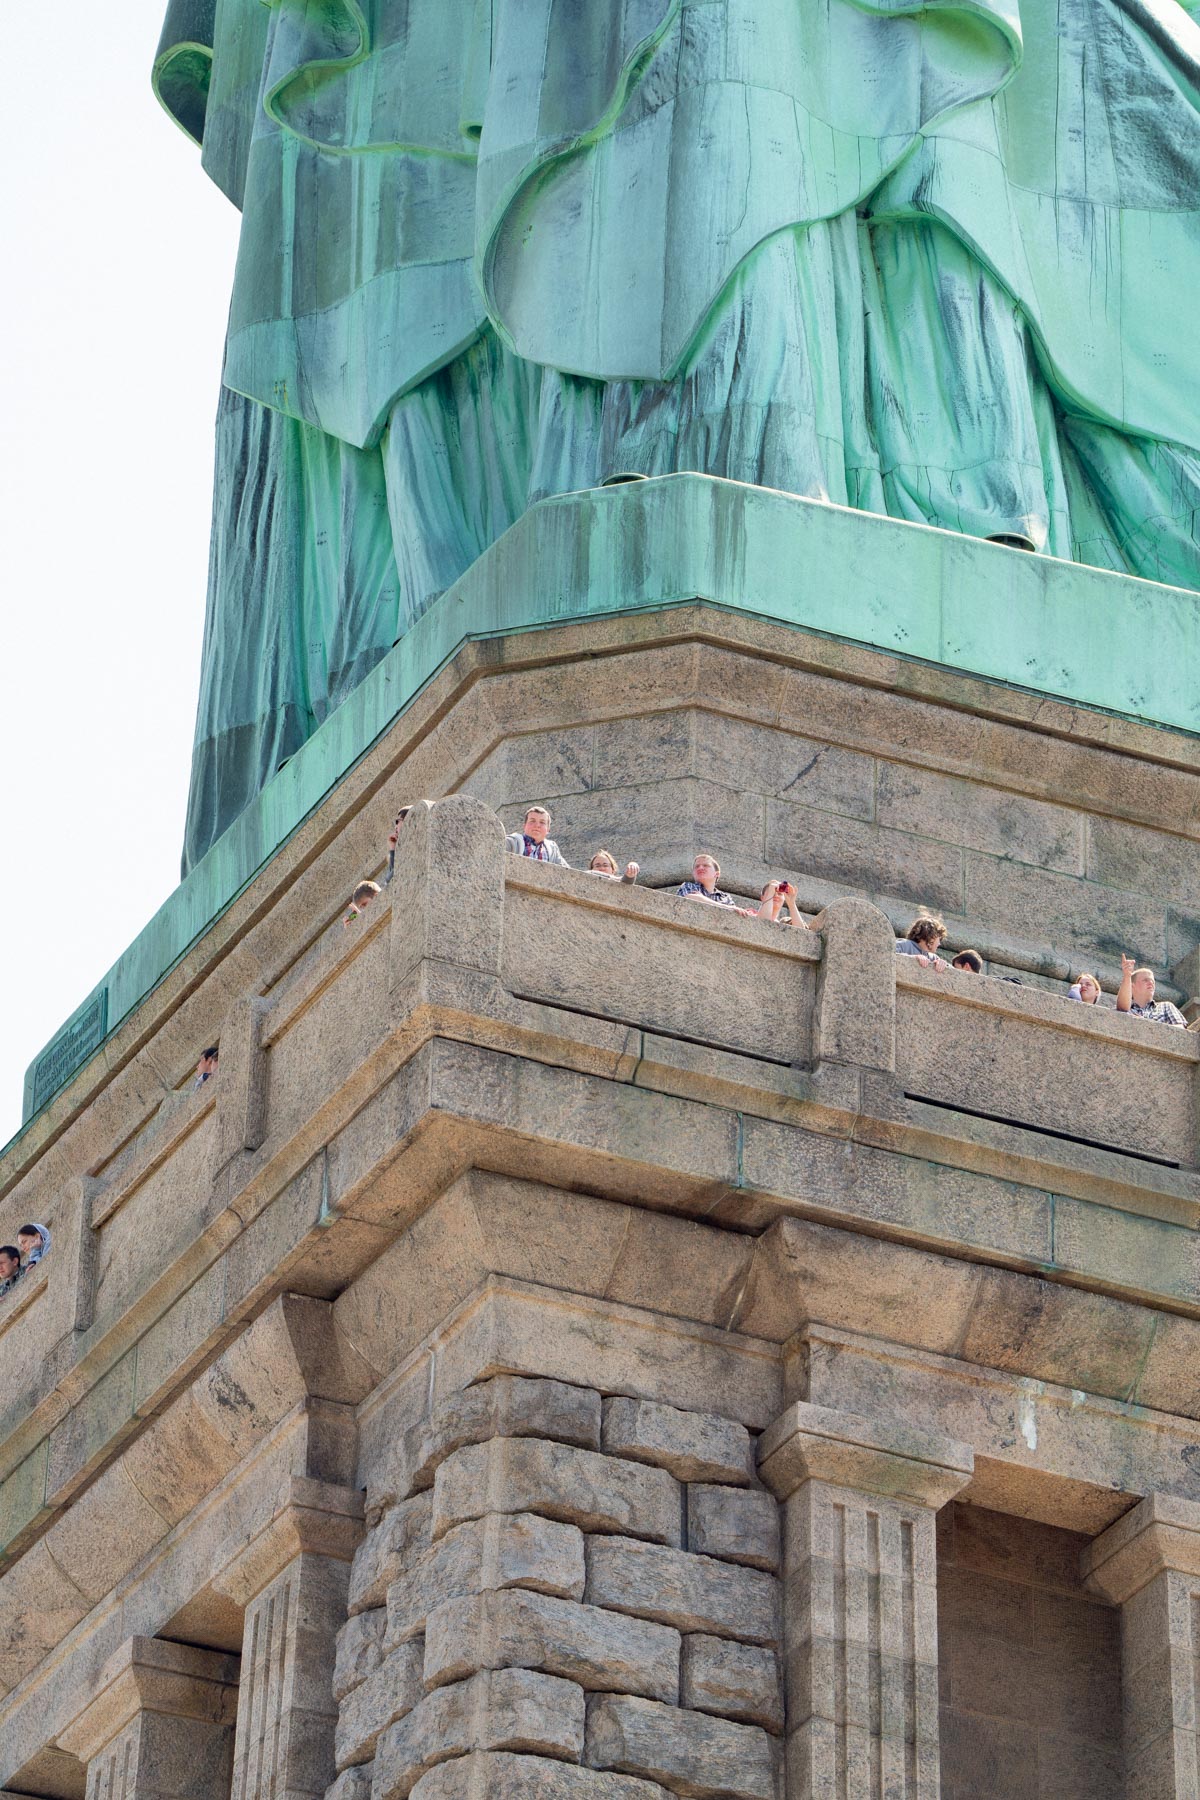 people at the pedestal level of the Statue of Liberty